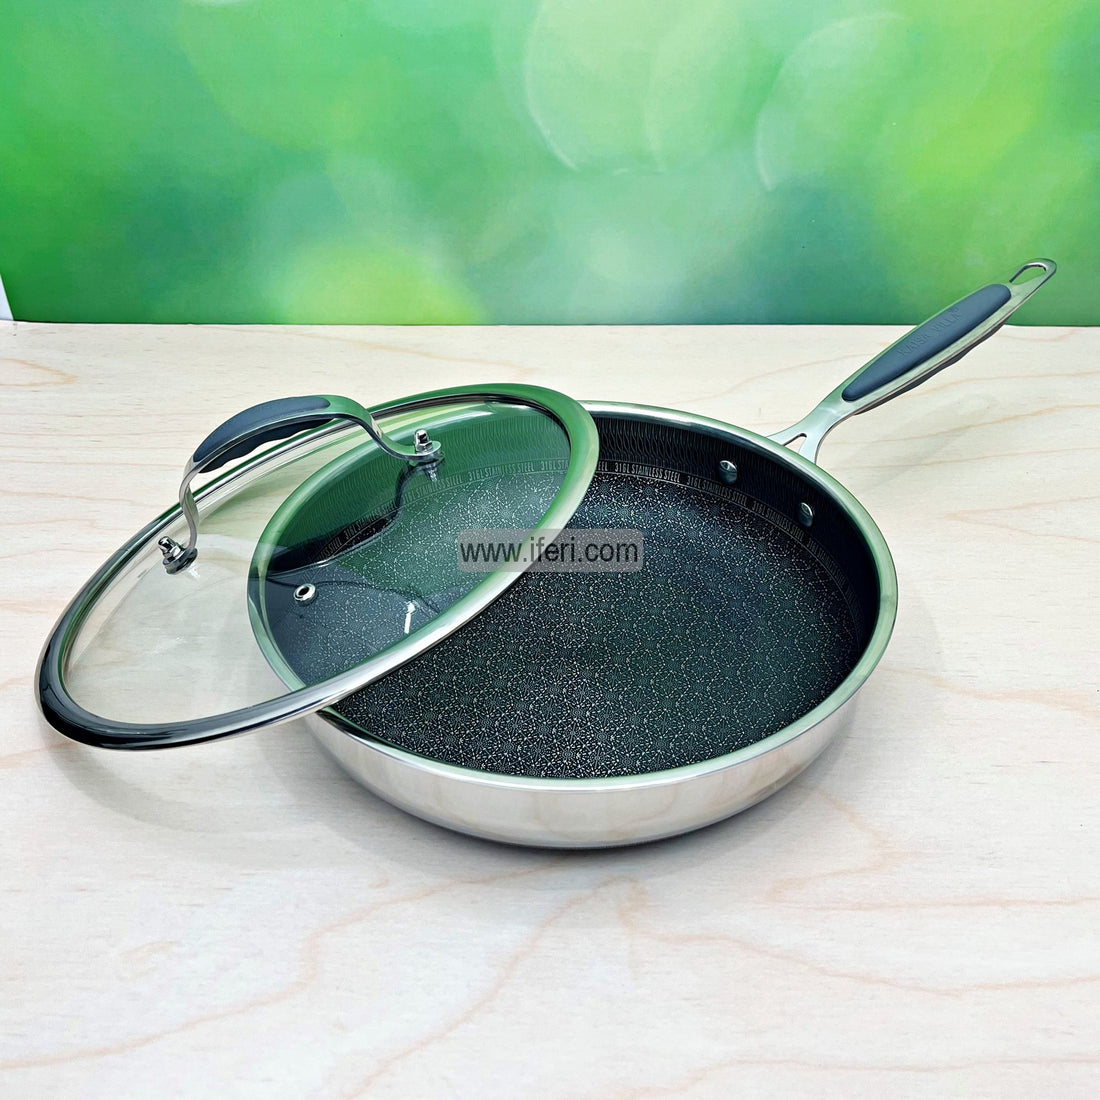 3 Layer Stainless Steel 316 Austenite Frying Pan with Lid Price in Bangladesh